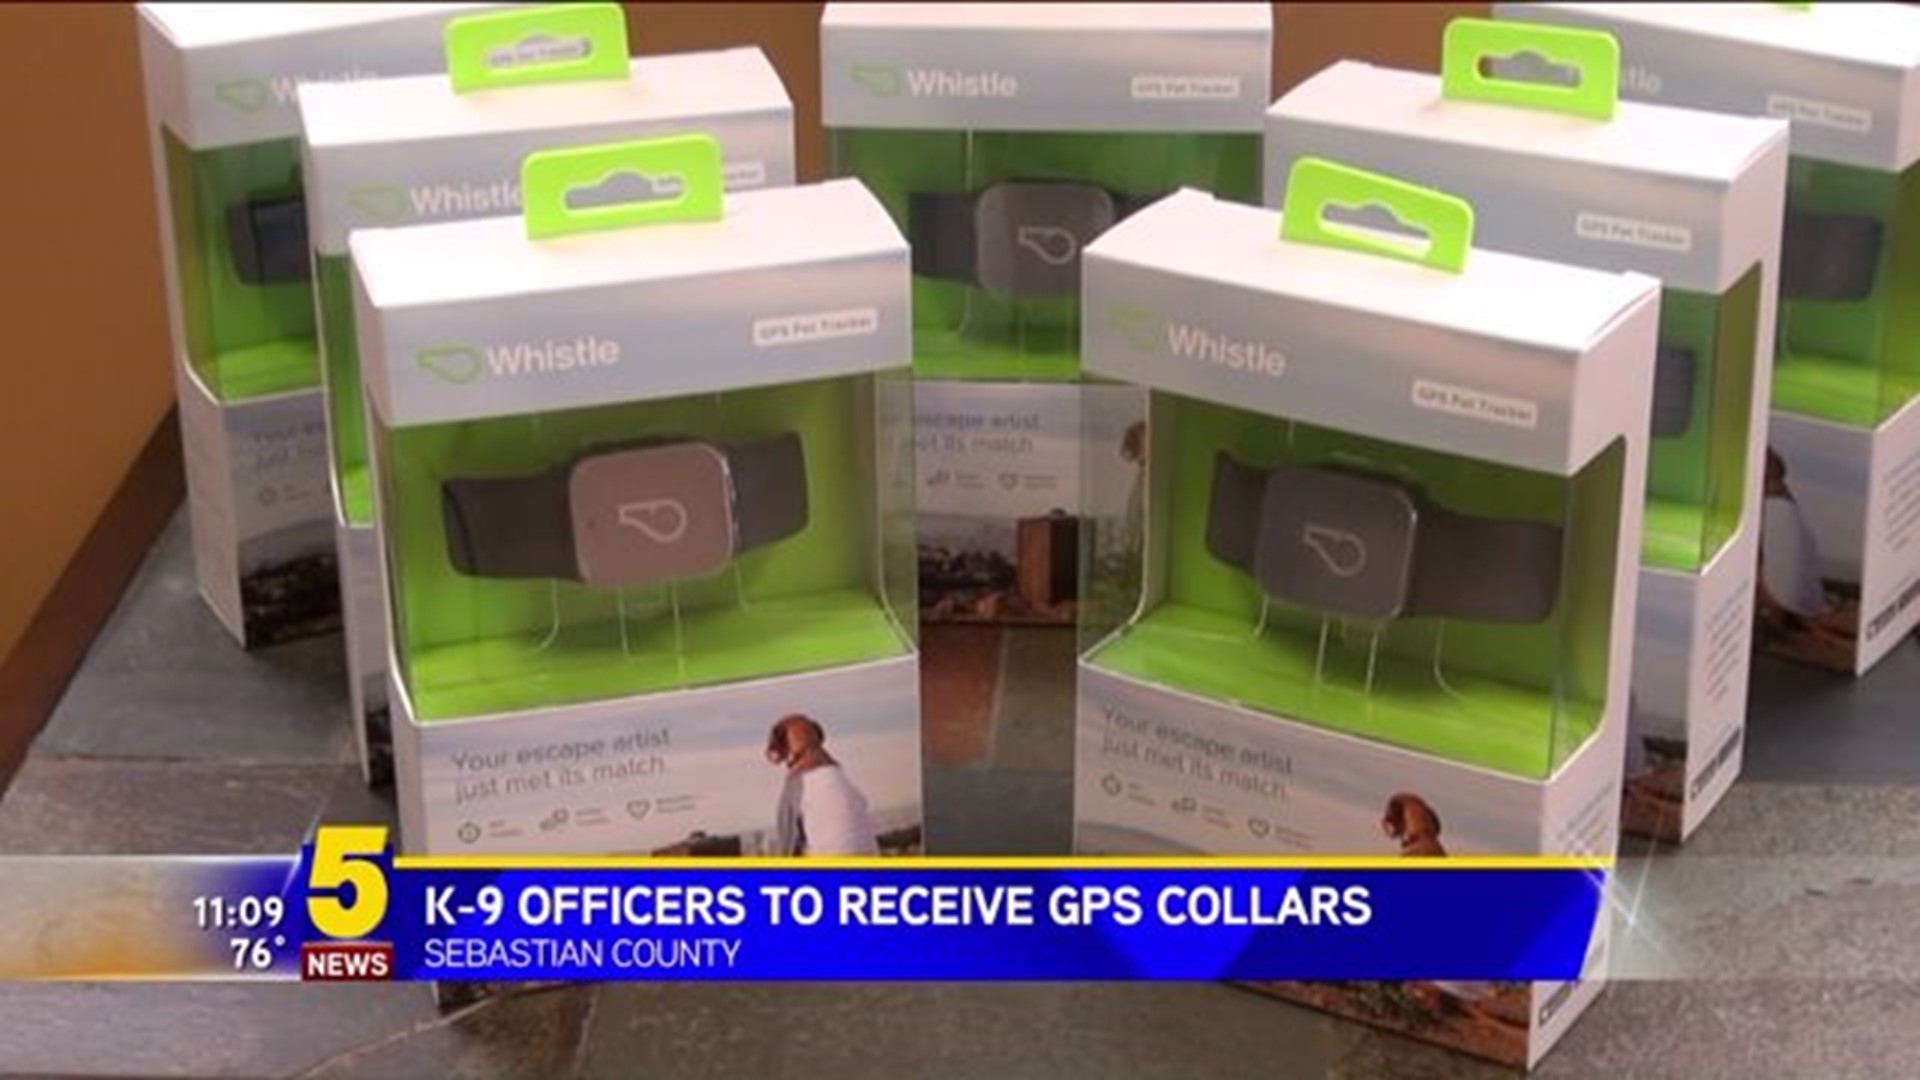 K-9 Officer To Receive GPS Collars